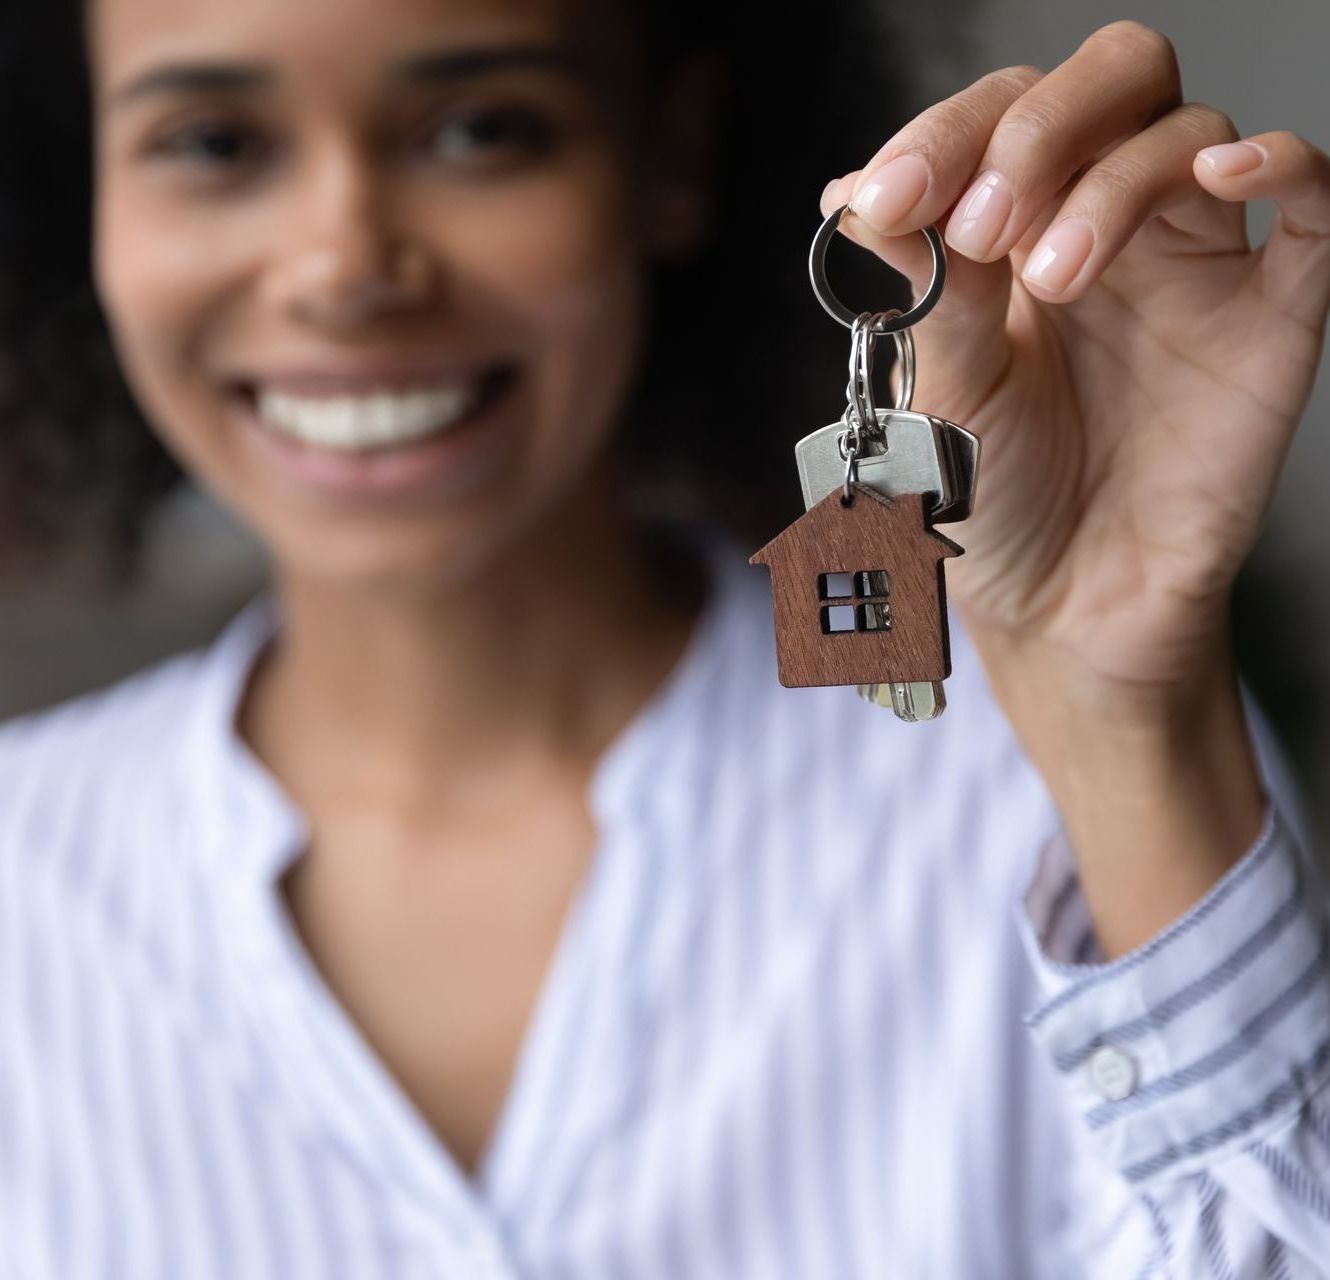 A woman is holding a pair of keys with a house keychain attached to them.